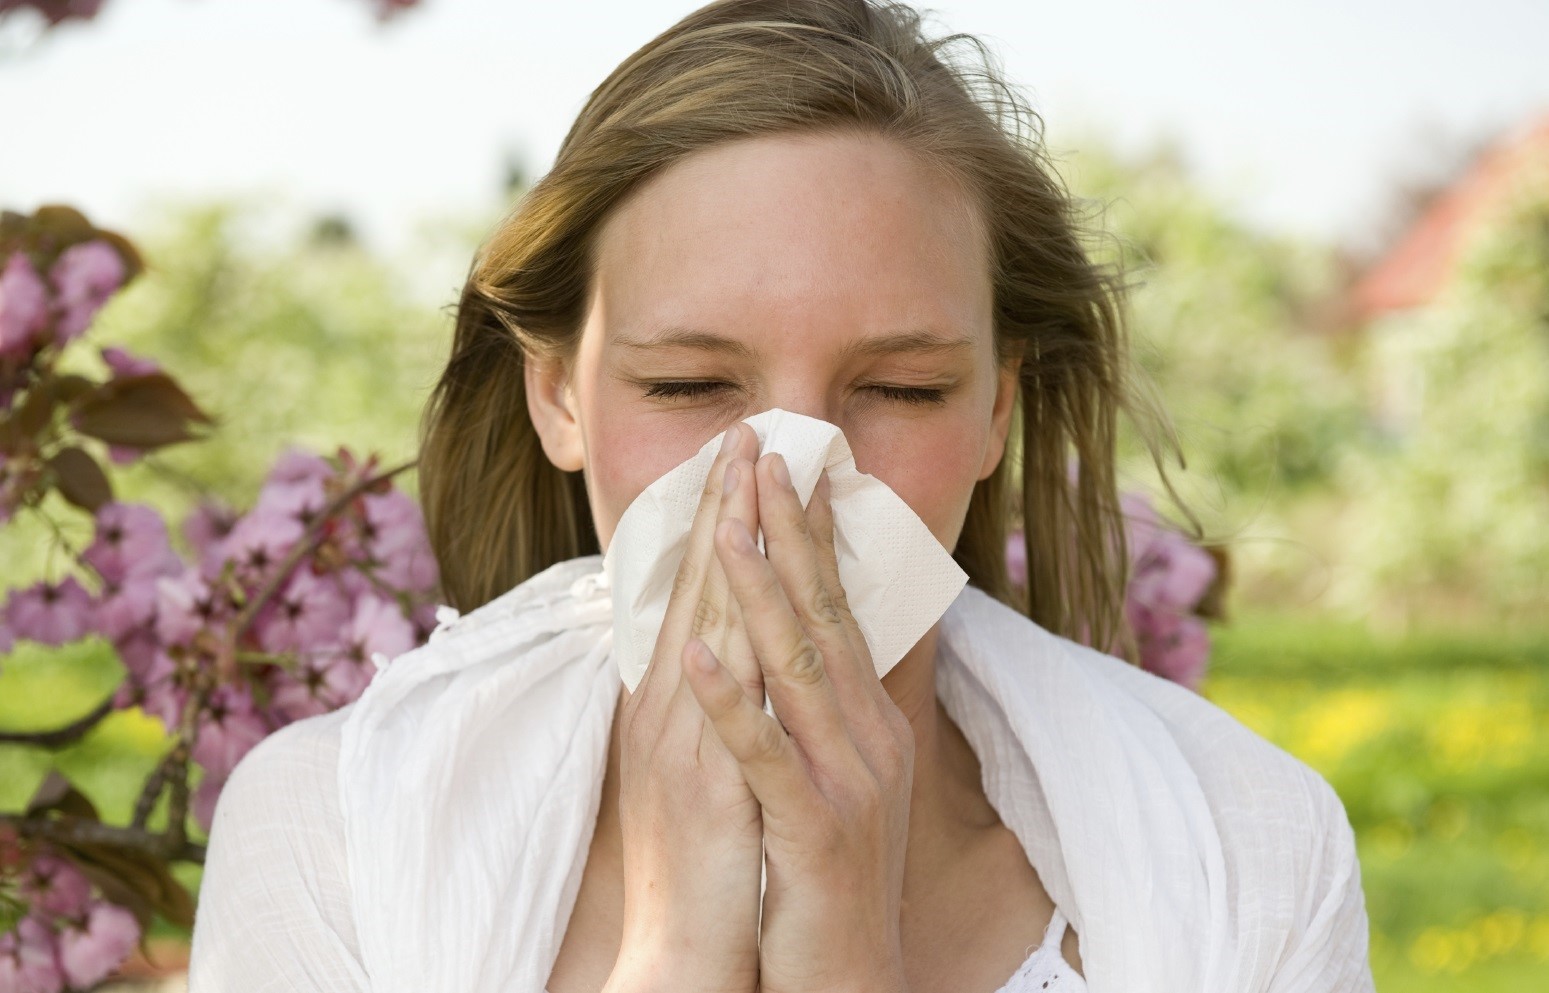 Good news for hay fever sufferers